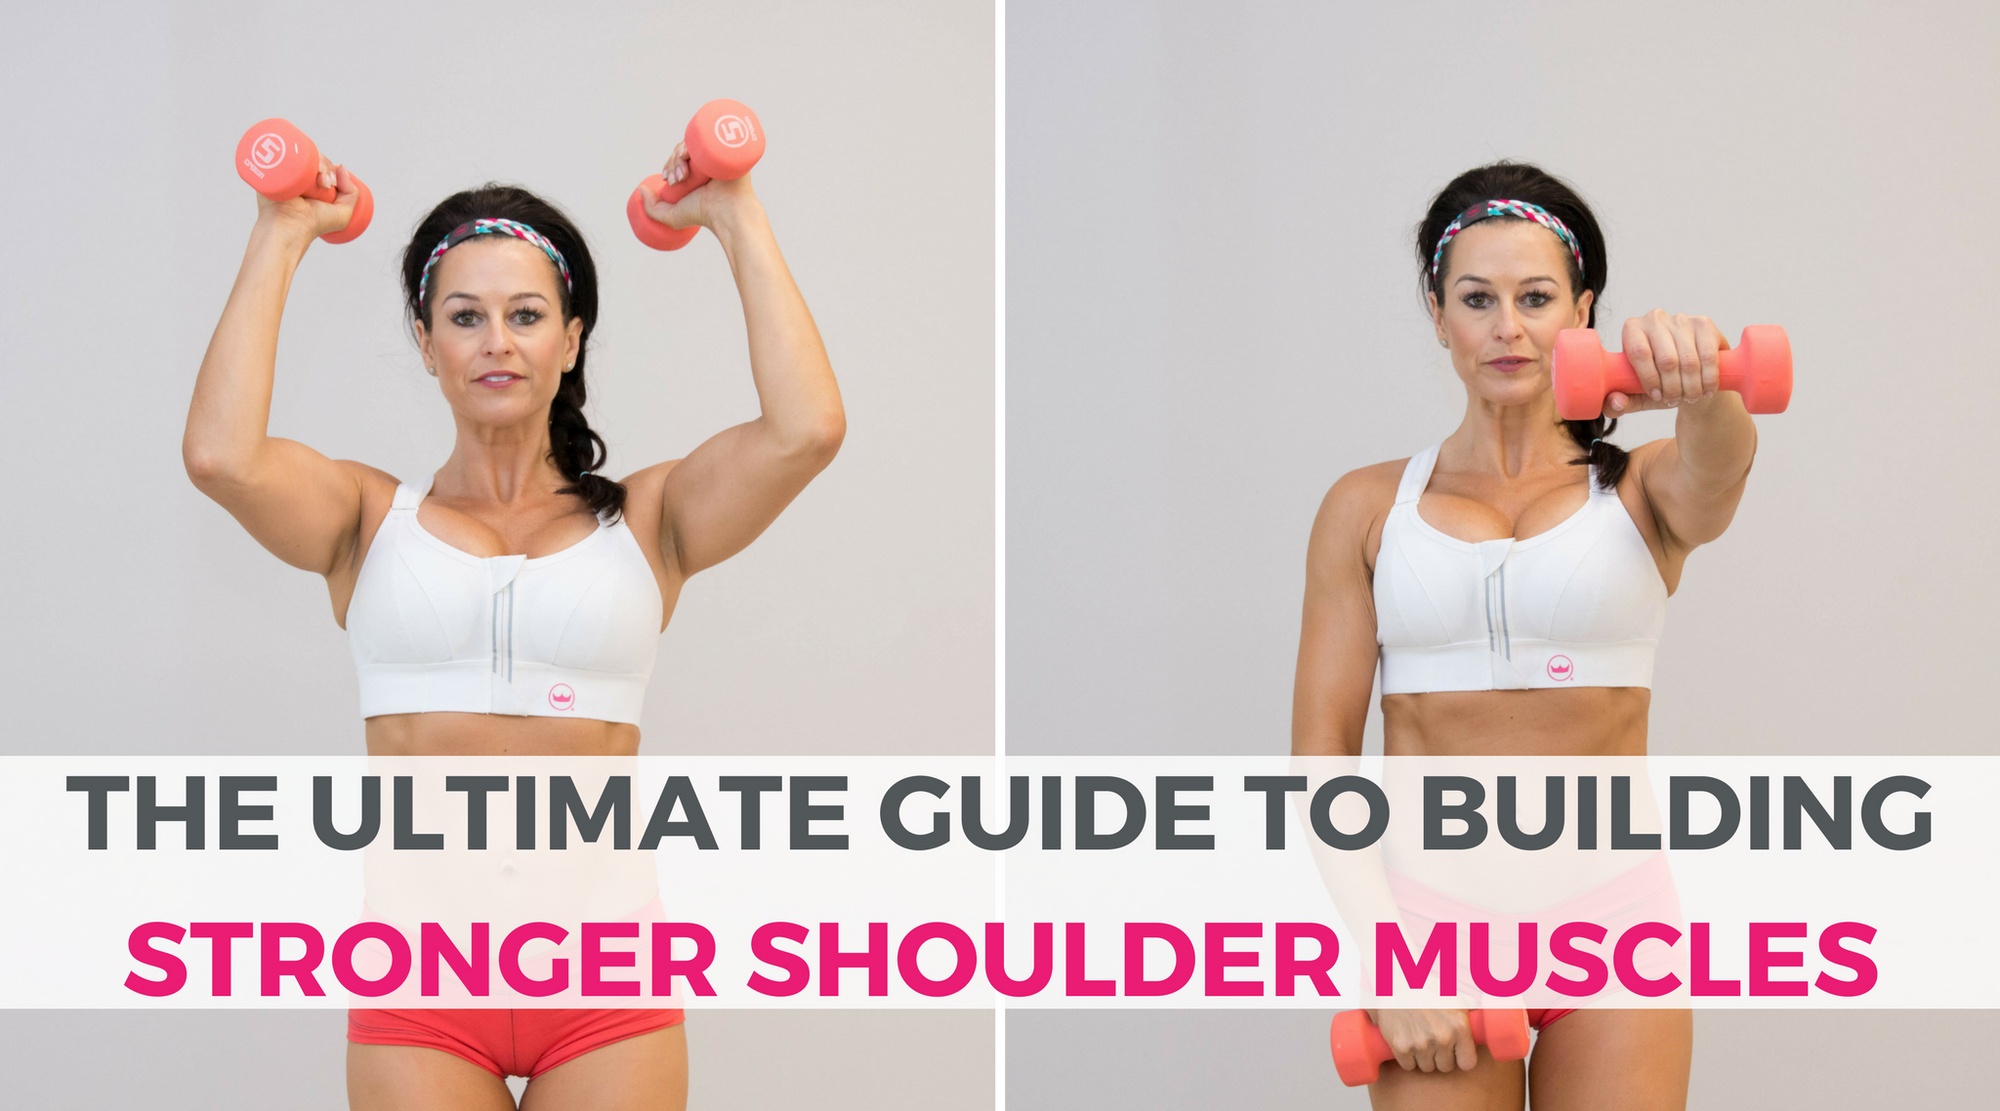 Sculpted shoulders can make your waist appear smaller, your hips more narrow and your body appear more proportionate overall. So to build those sexy shoulder muscles, grab a pair of dumbbells and get ready to do some fat-burning exercises that are guarant